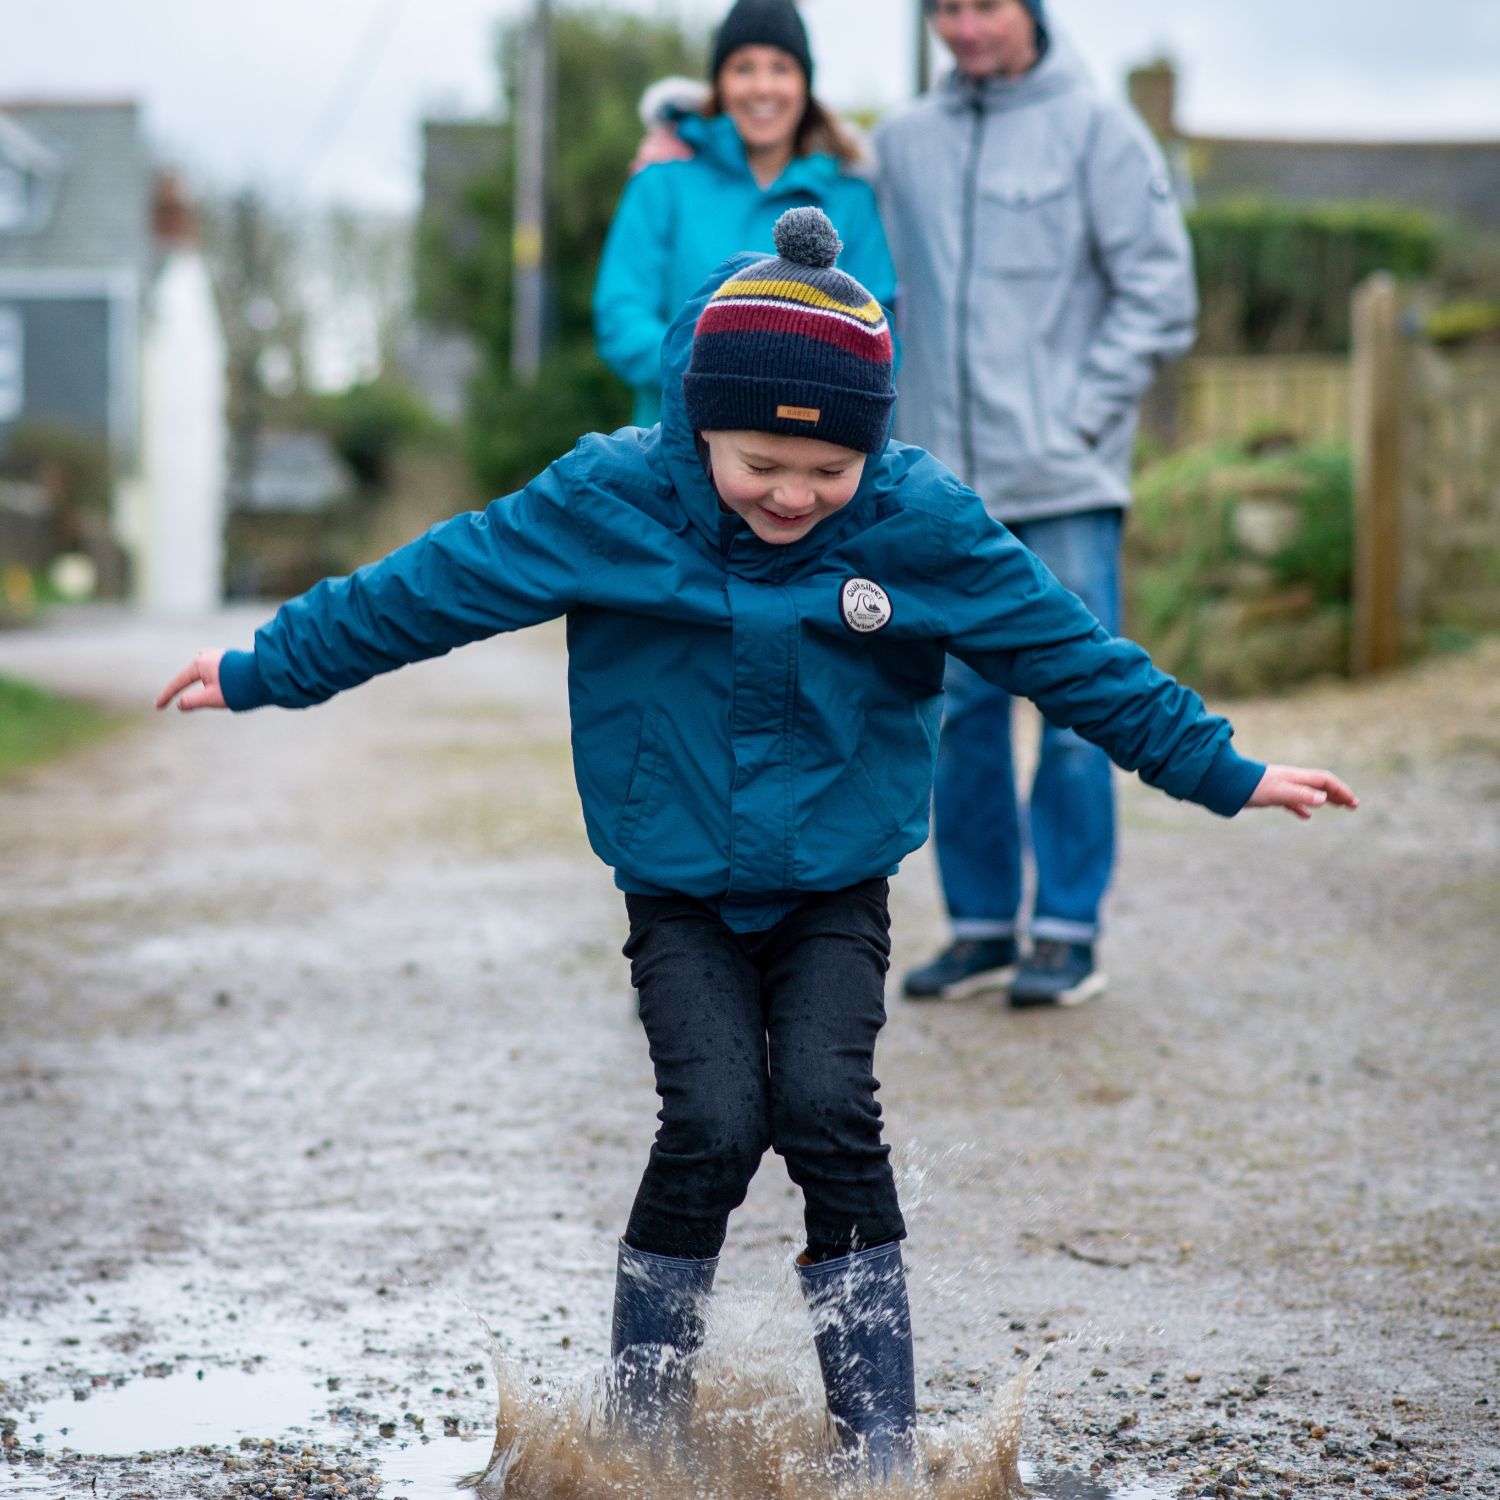 A young boy jumping in a puddle in front of his parents